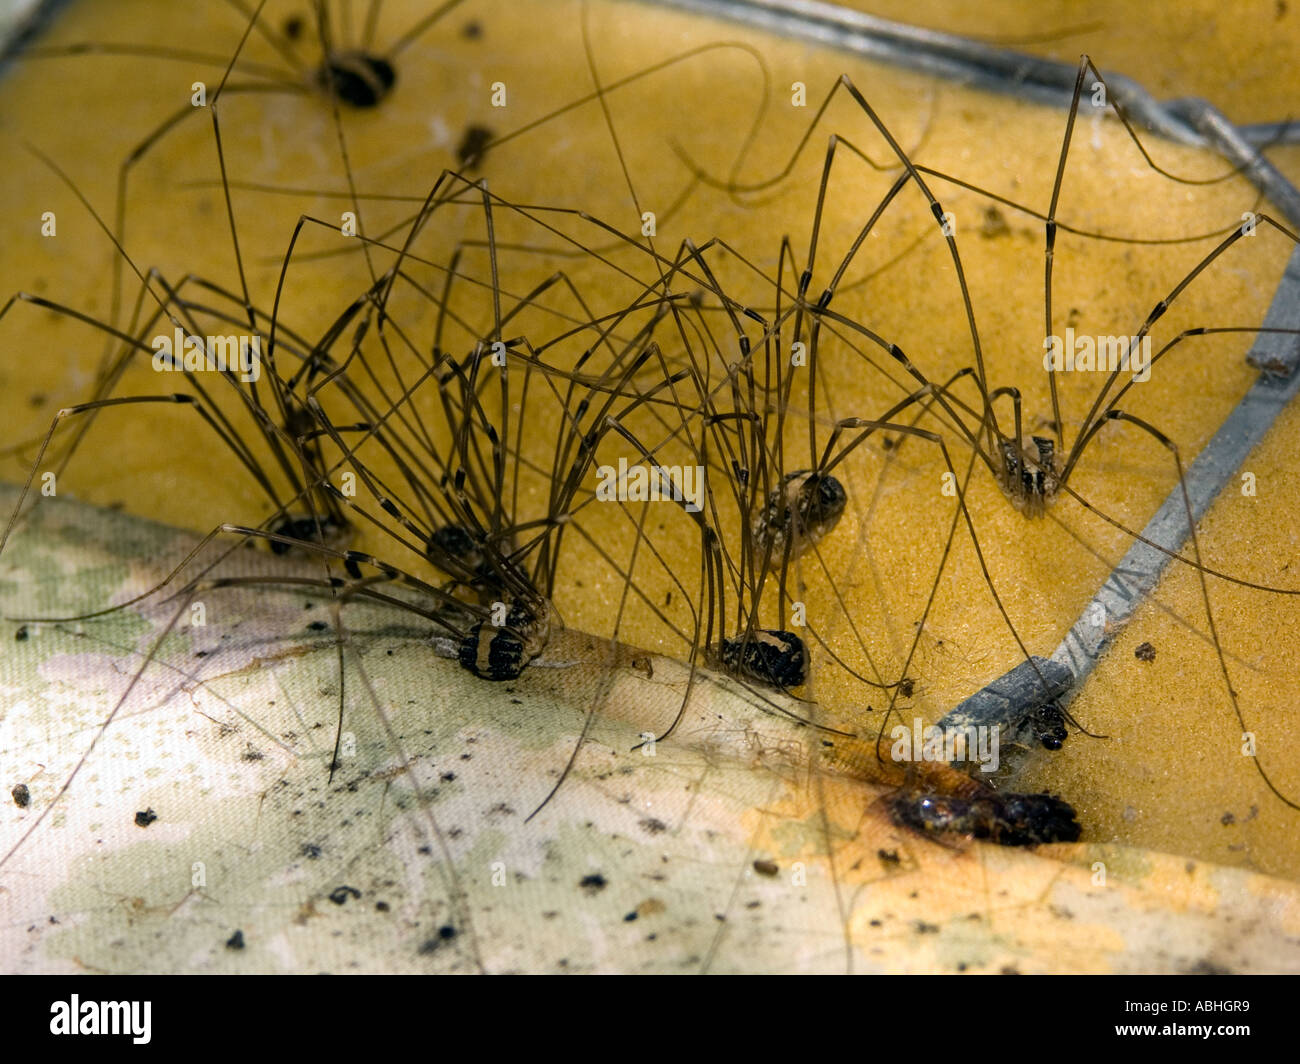 Group of Daddy Longlegs under a discarded sofa Stock Photo